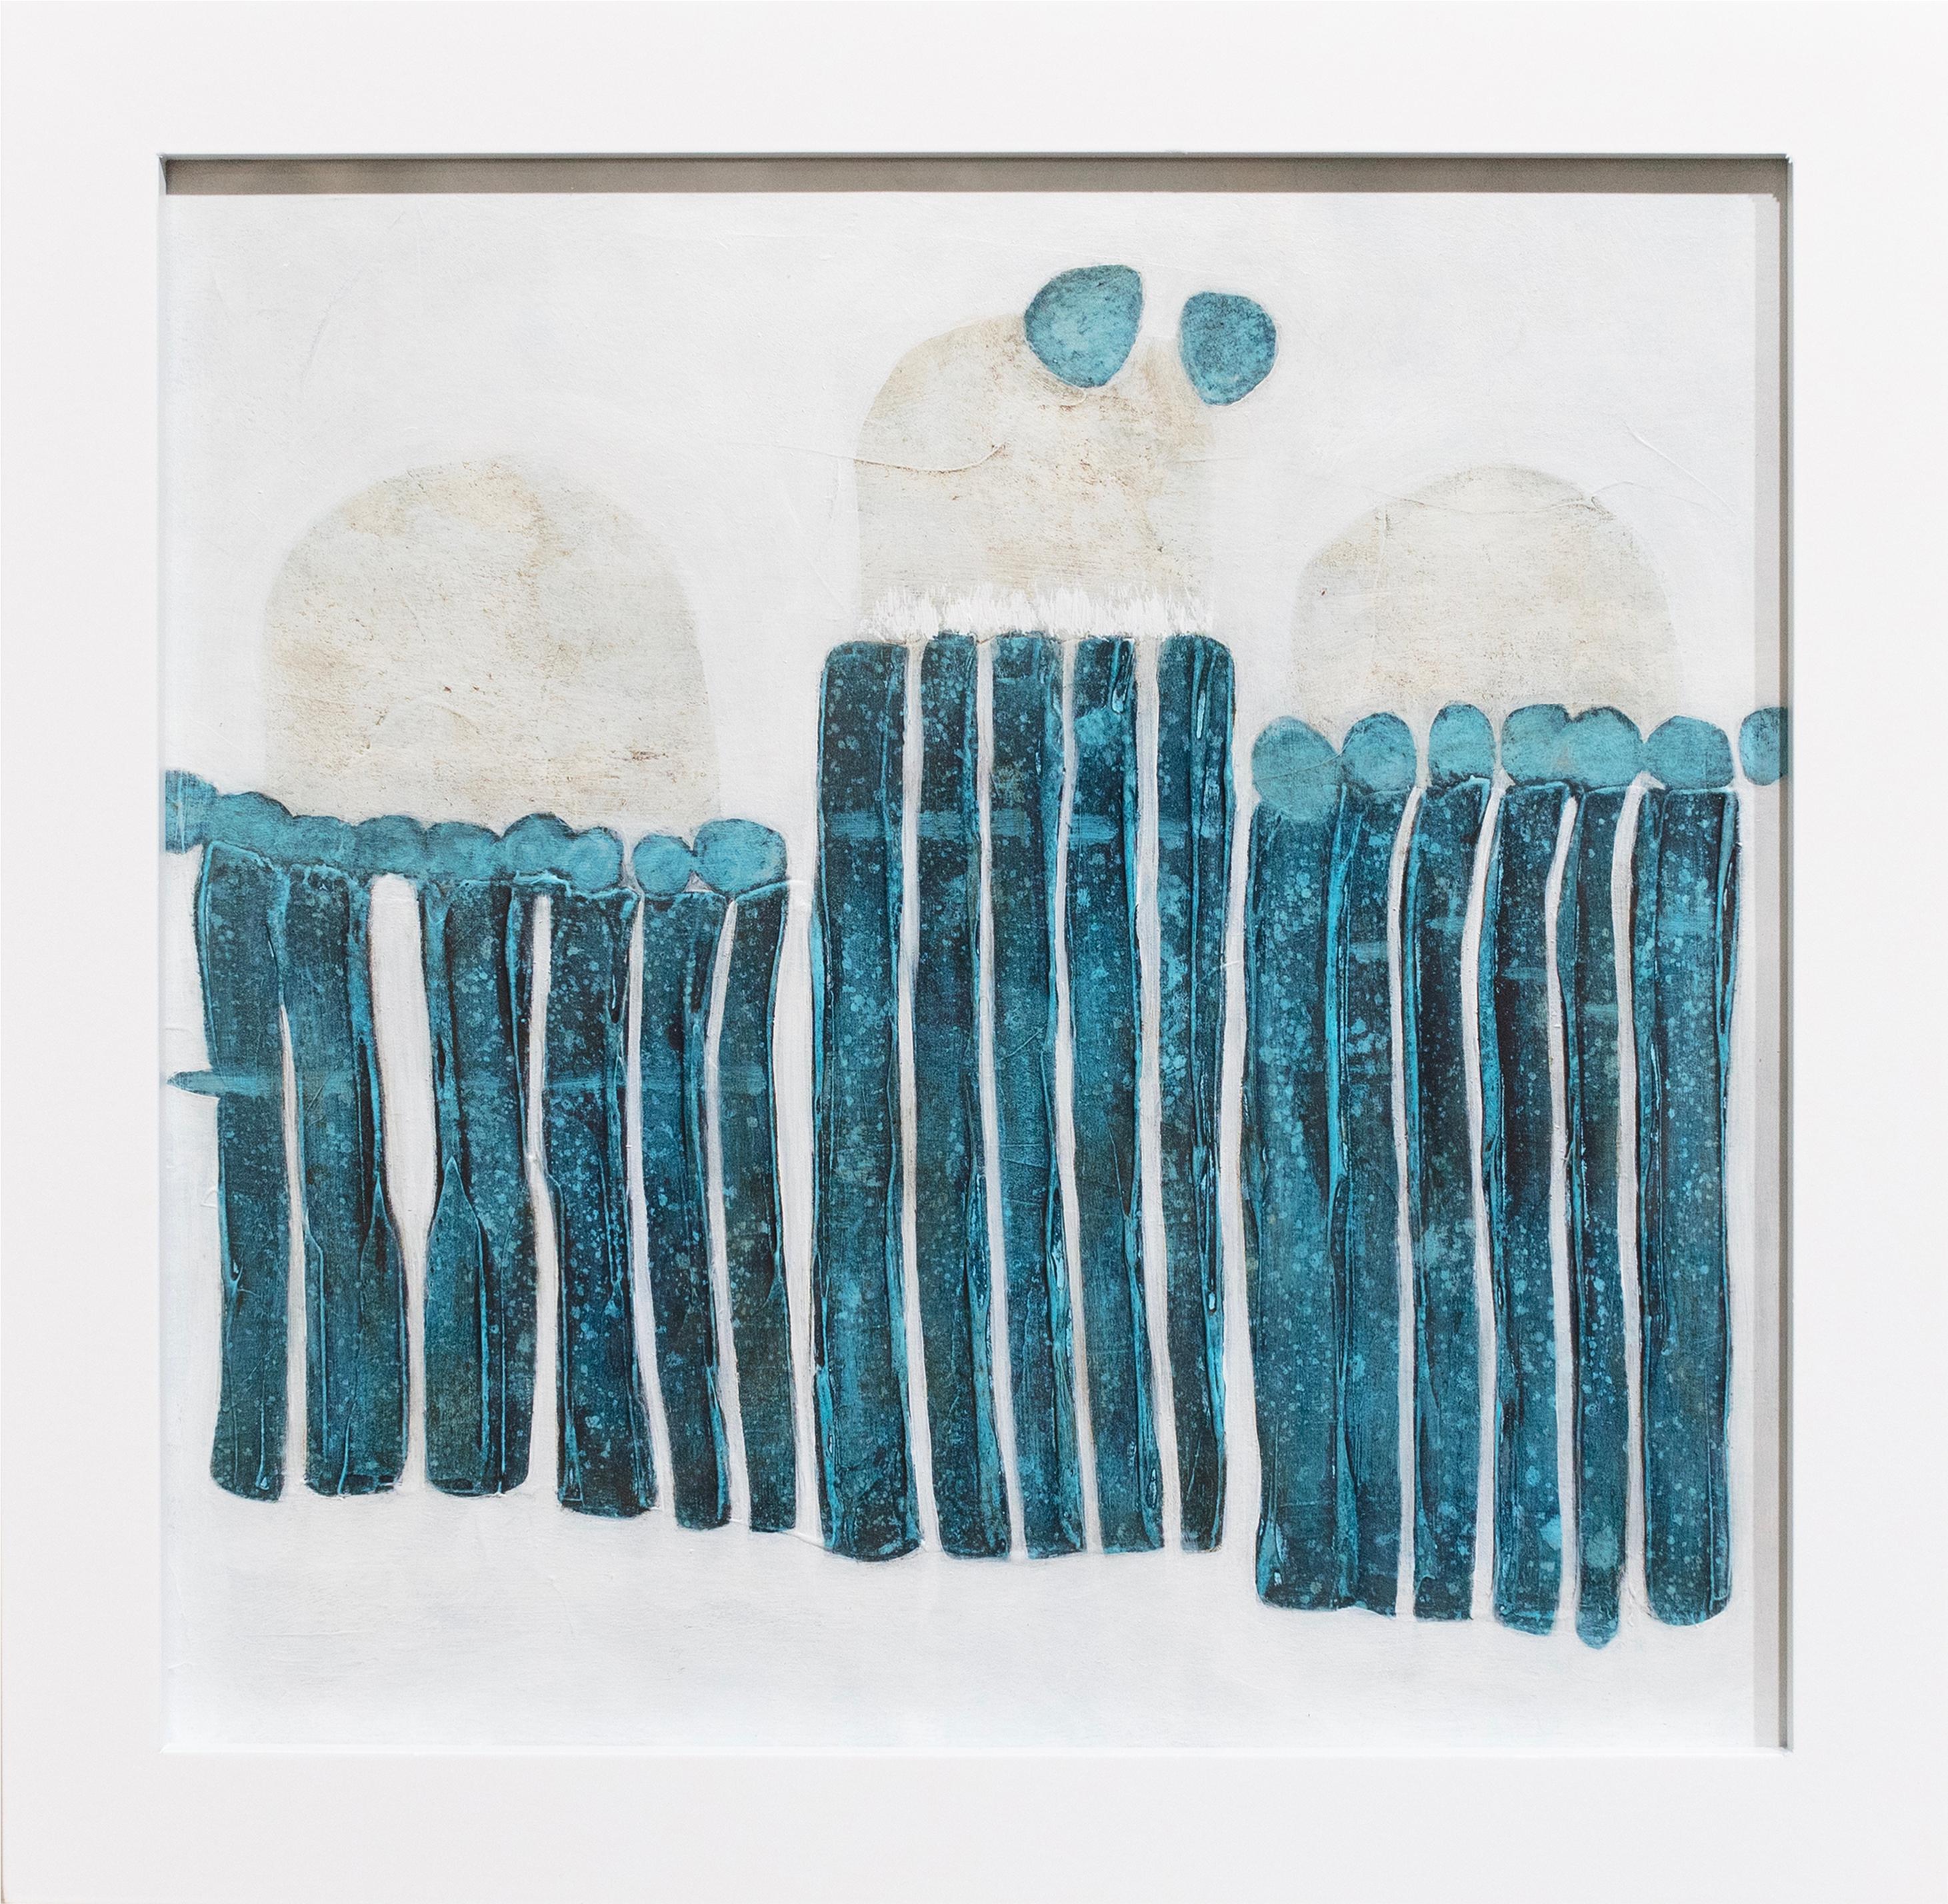 This abstract painting by Sofie Swann features cool coastal palette, with teal blue and beige shapes and a white background. The painting is made on paper and measures 12" x 12". It is framed in a clean, contemporary white frame. Framed, this piece